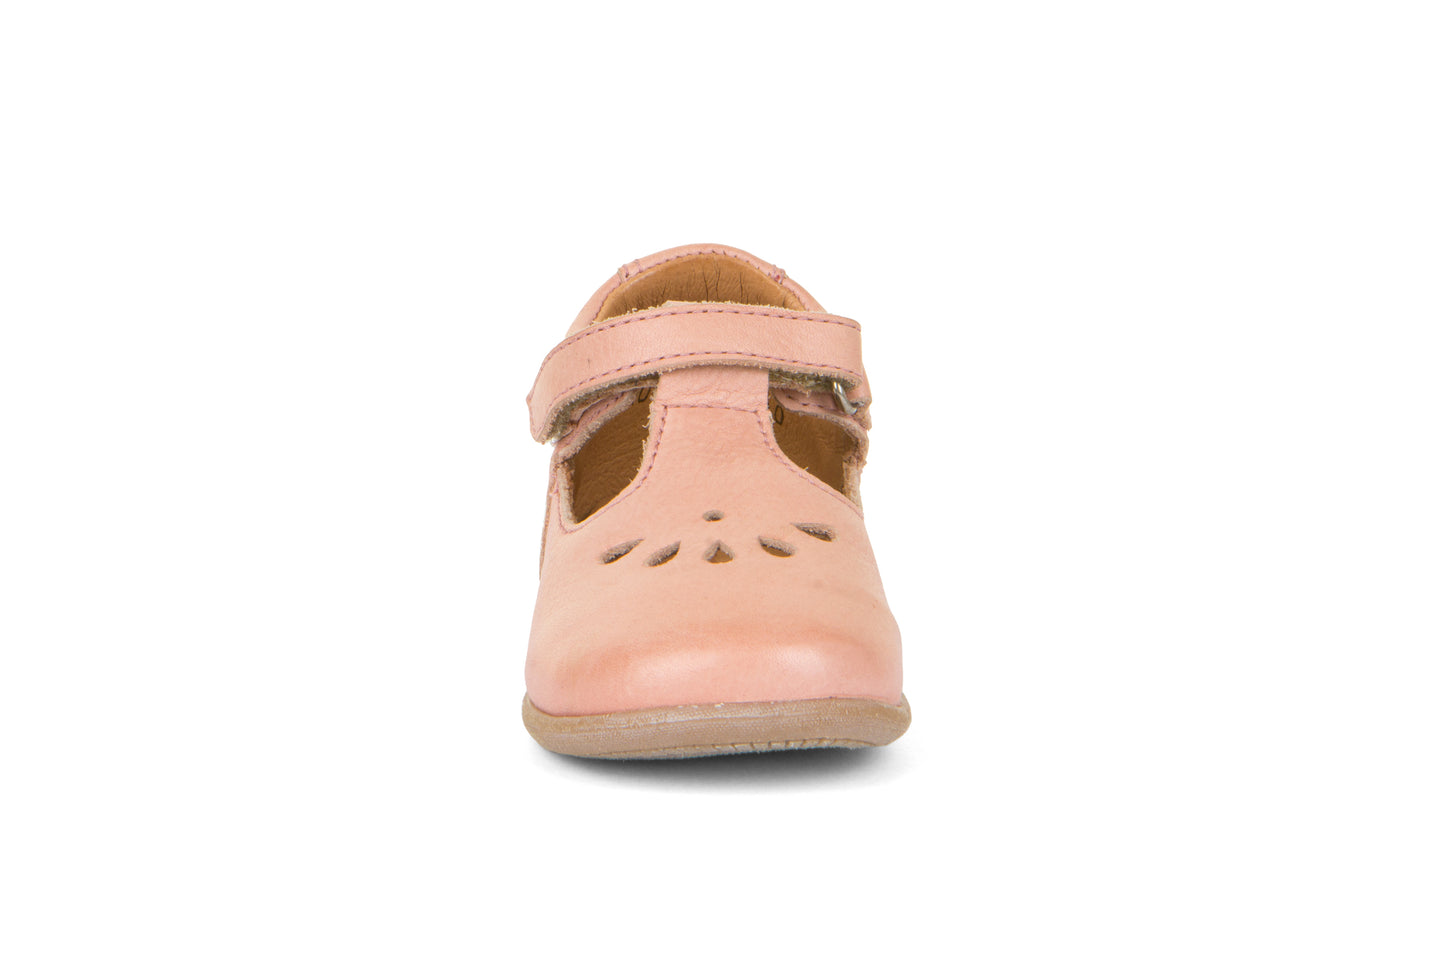 A girls shoe by Froddo, style G2140060-2 Gigi T-bar, in nude with teardrop cut out design, velcro fastening. Front view.